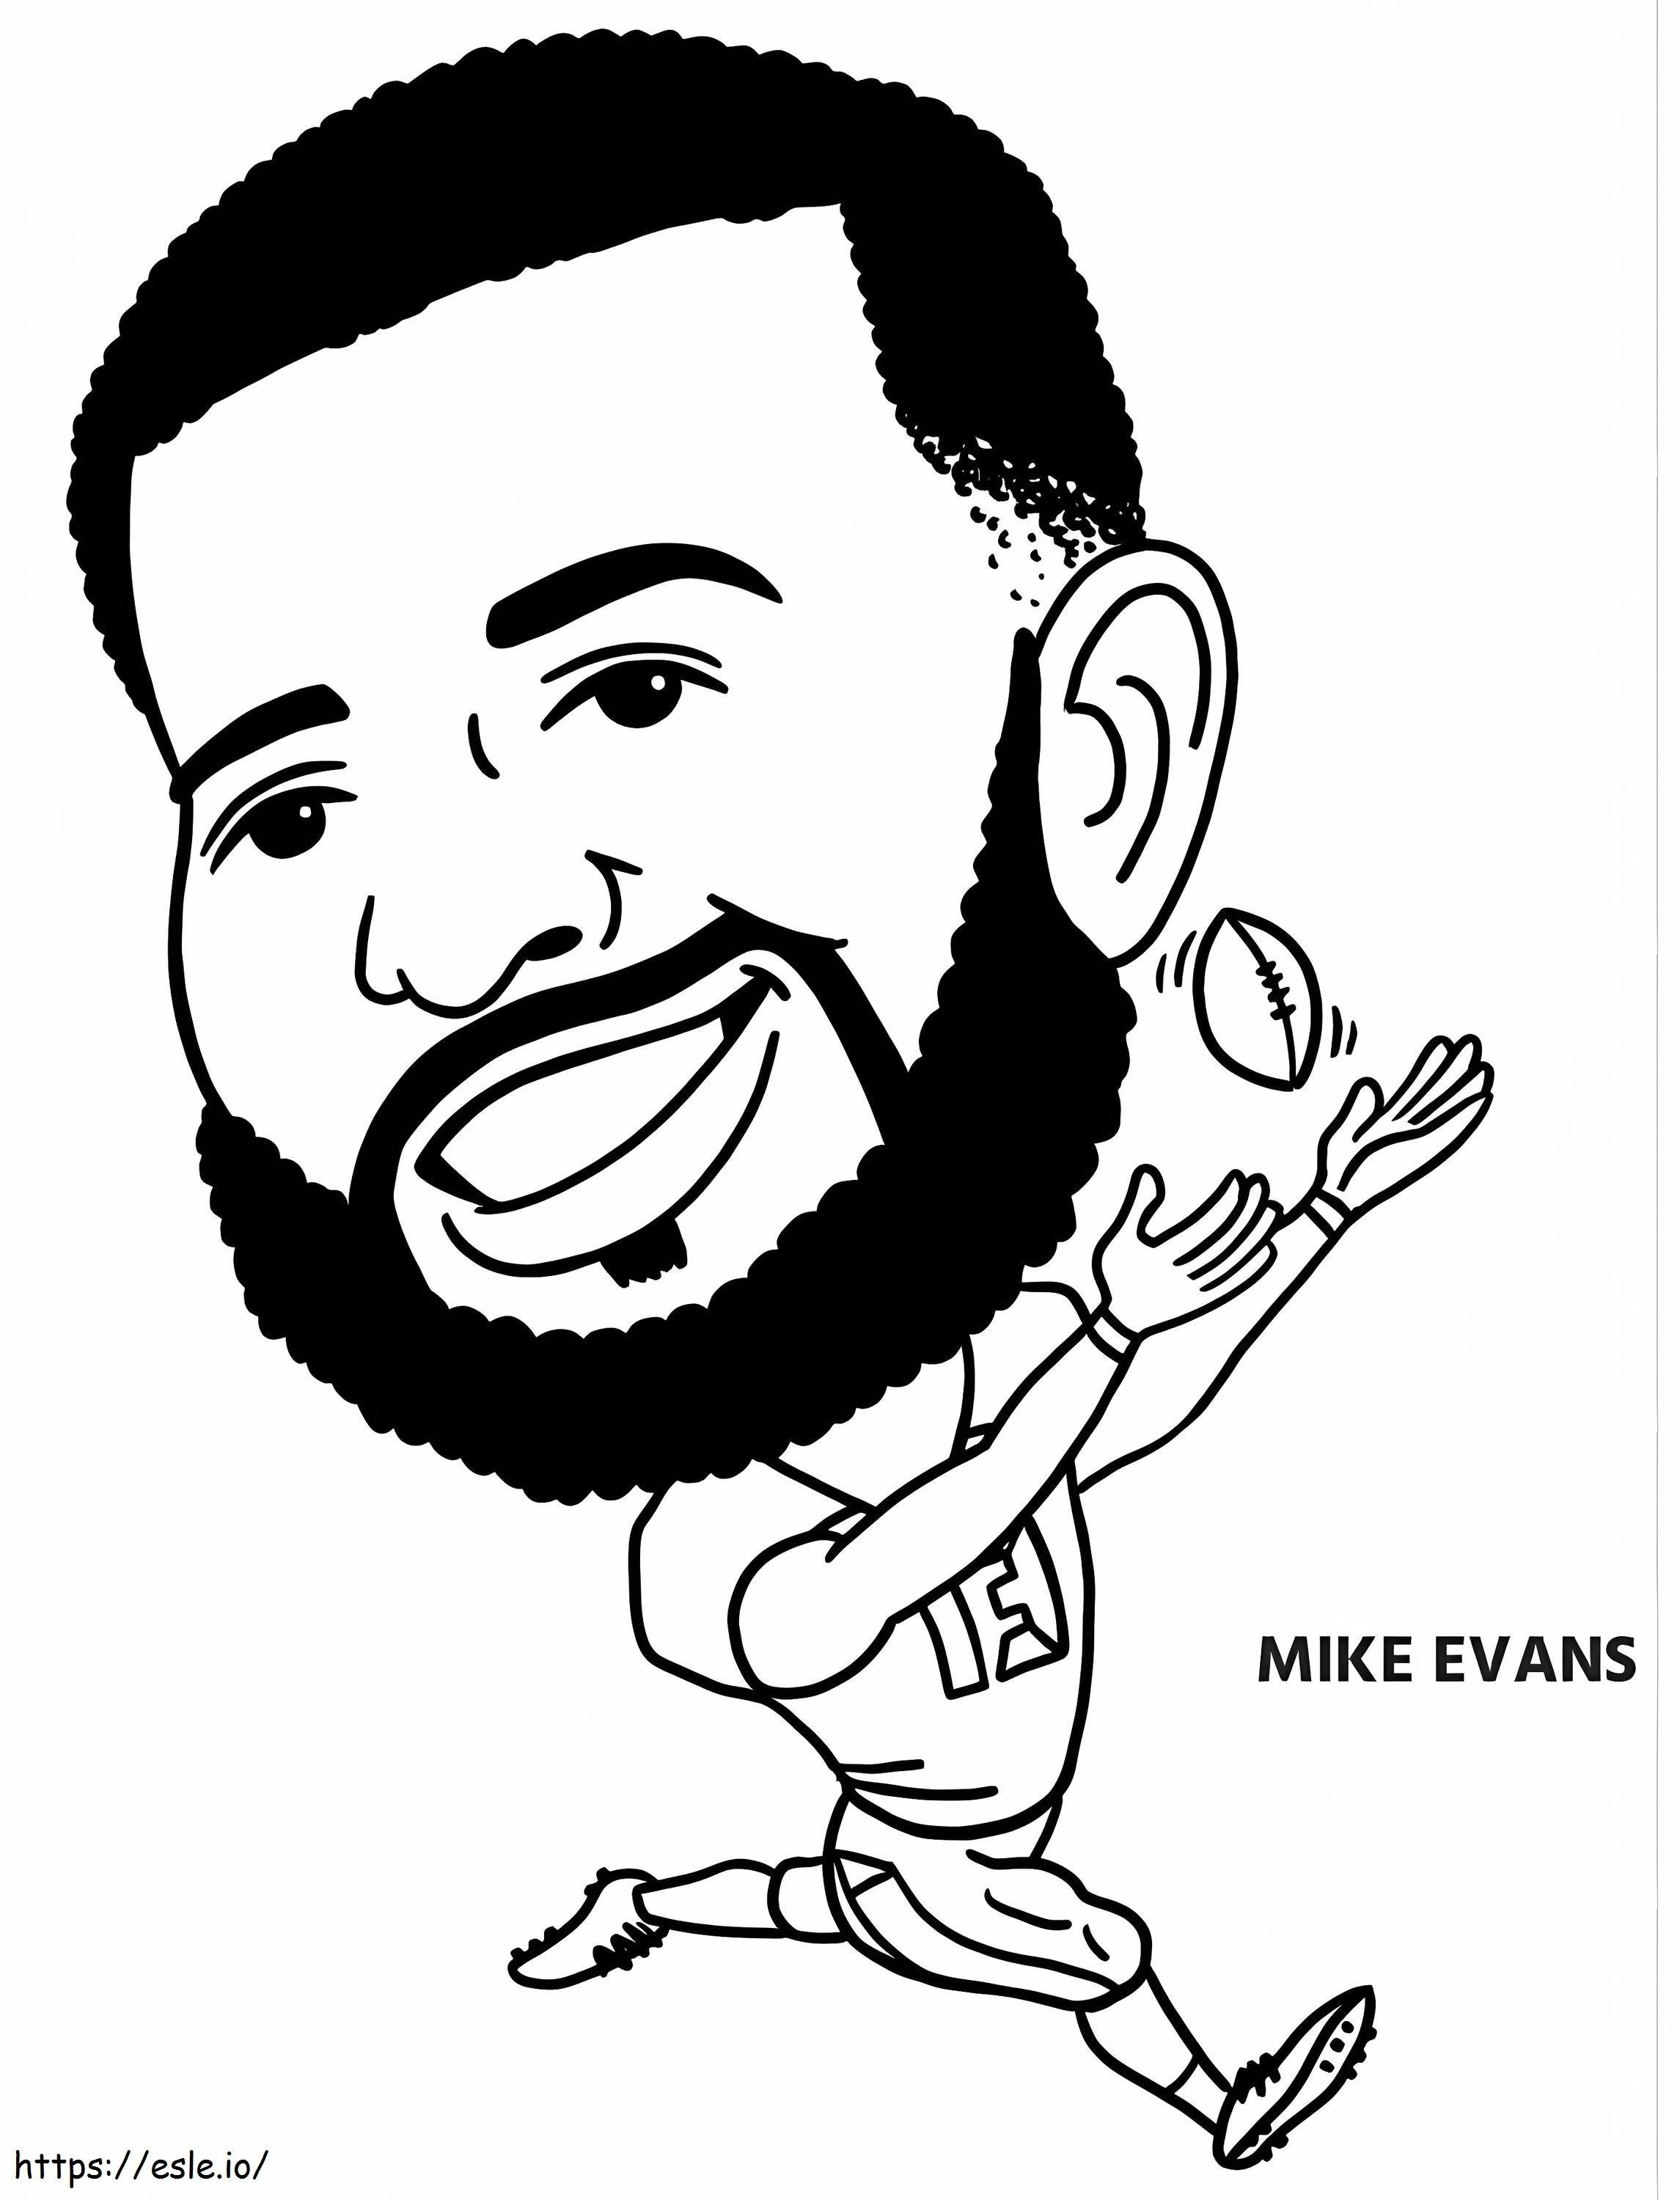 mike-evans-coloring-page